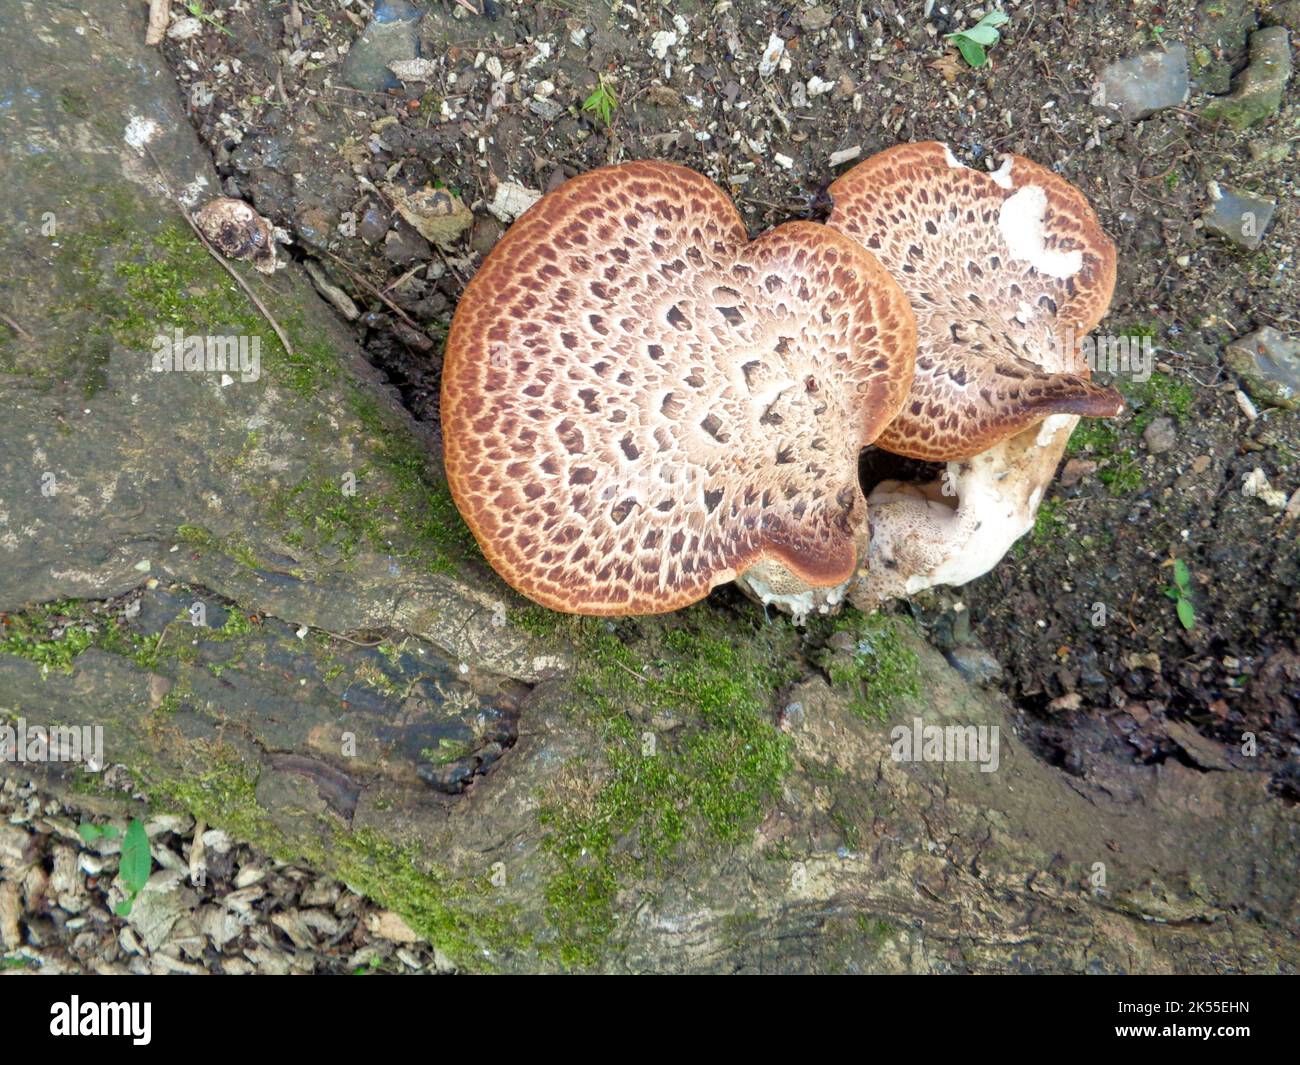 Large fungal growth on the roots of a dying tree stump, likely Dryads Saddle, Polyporus squamosus Stock Photo